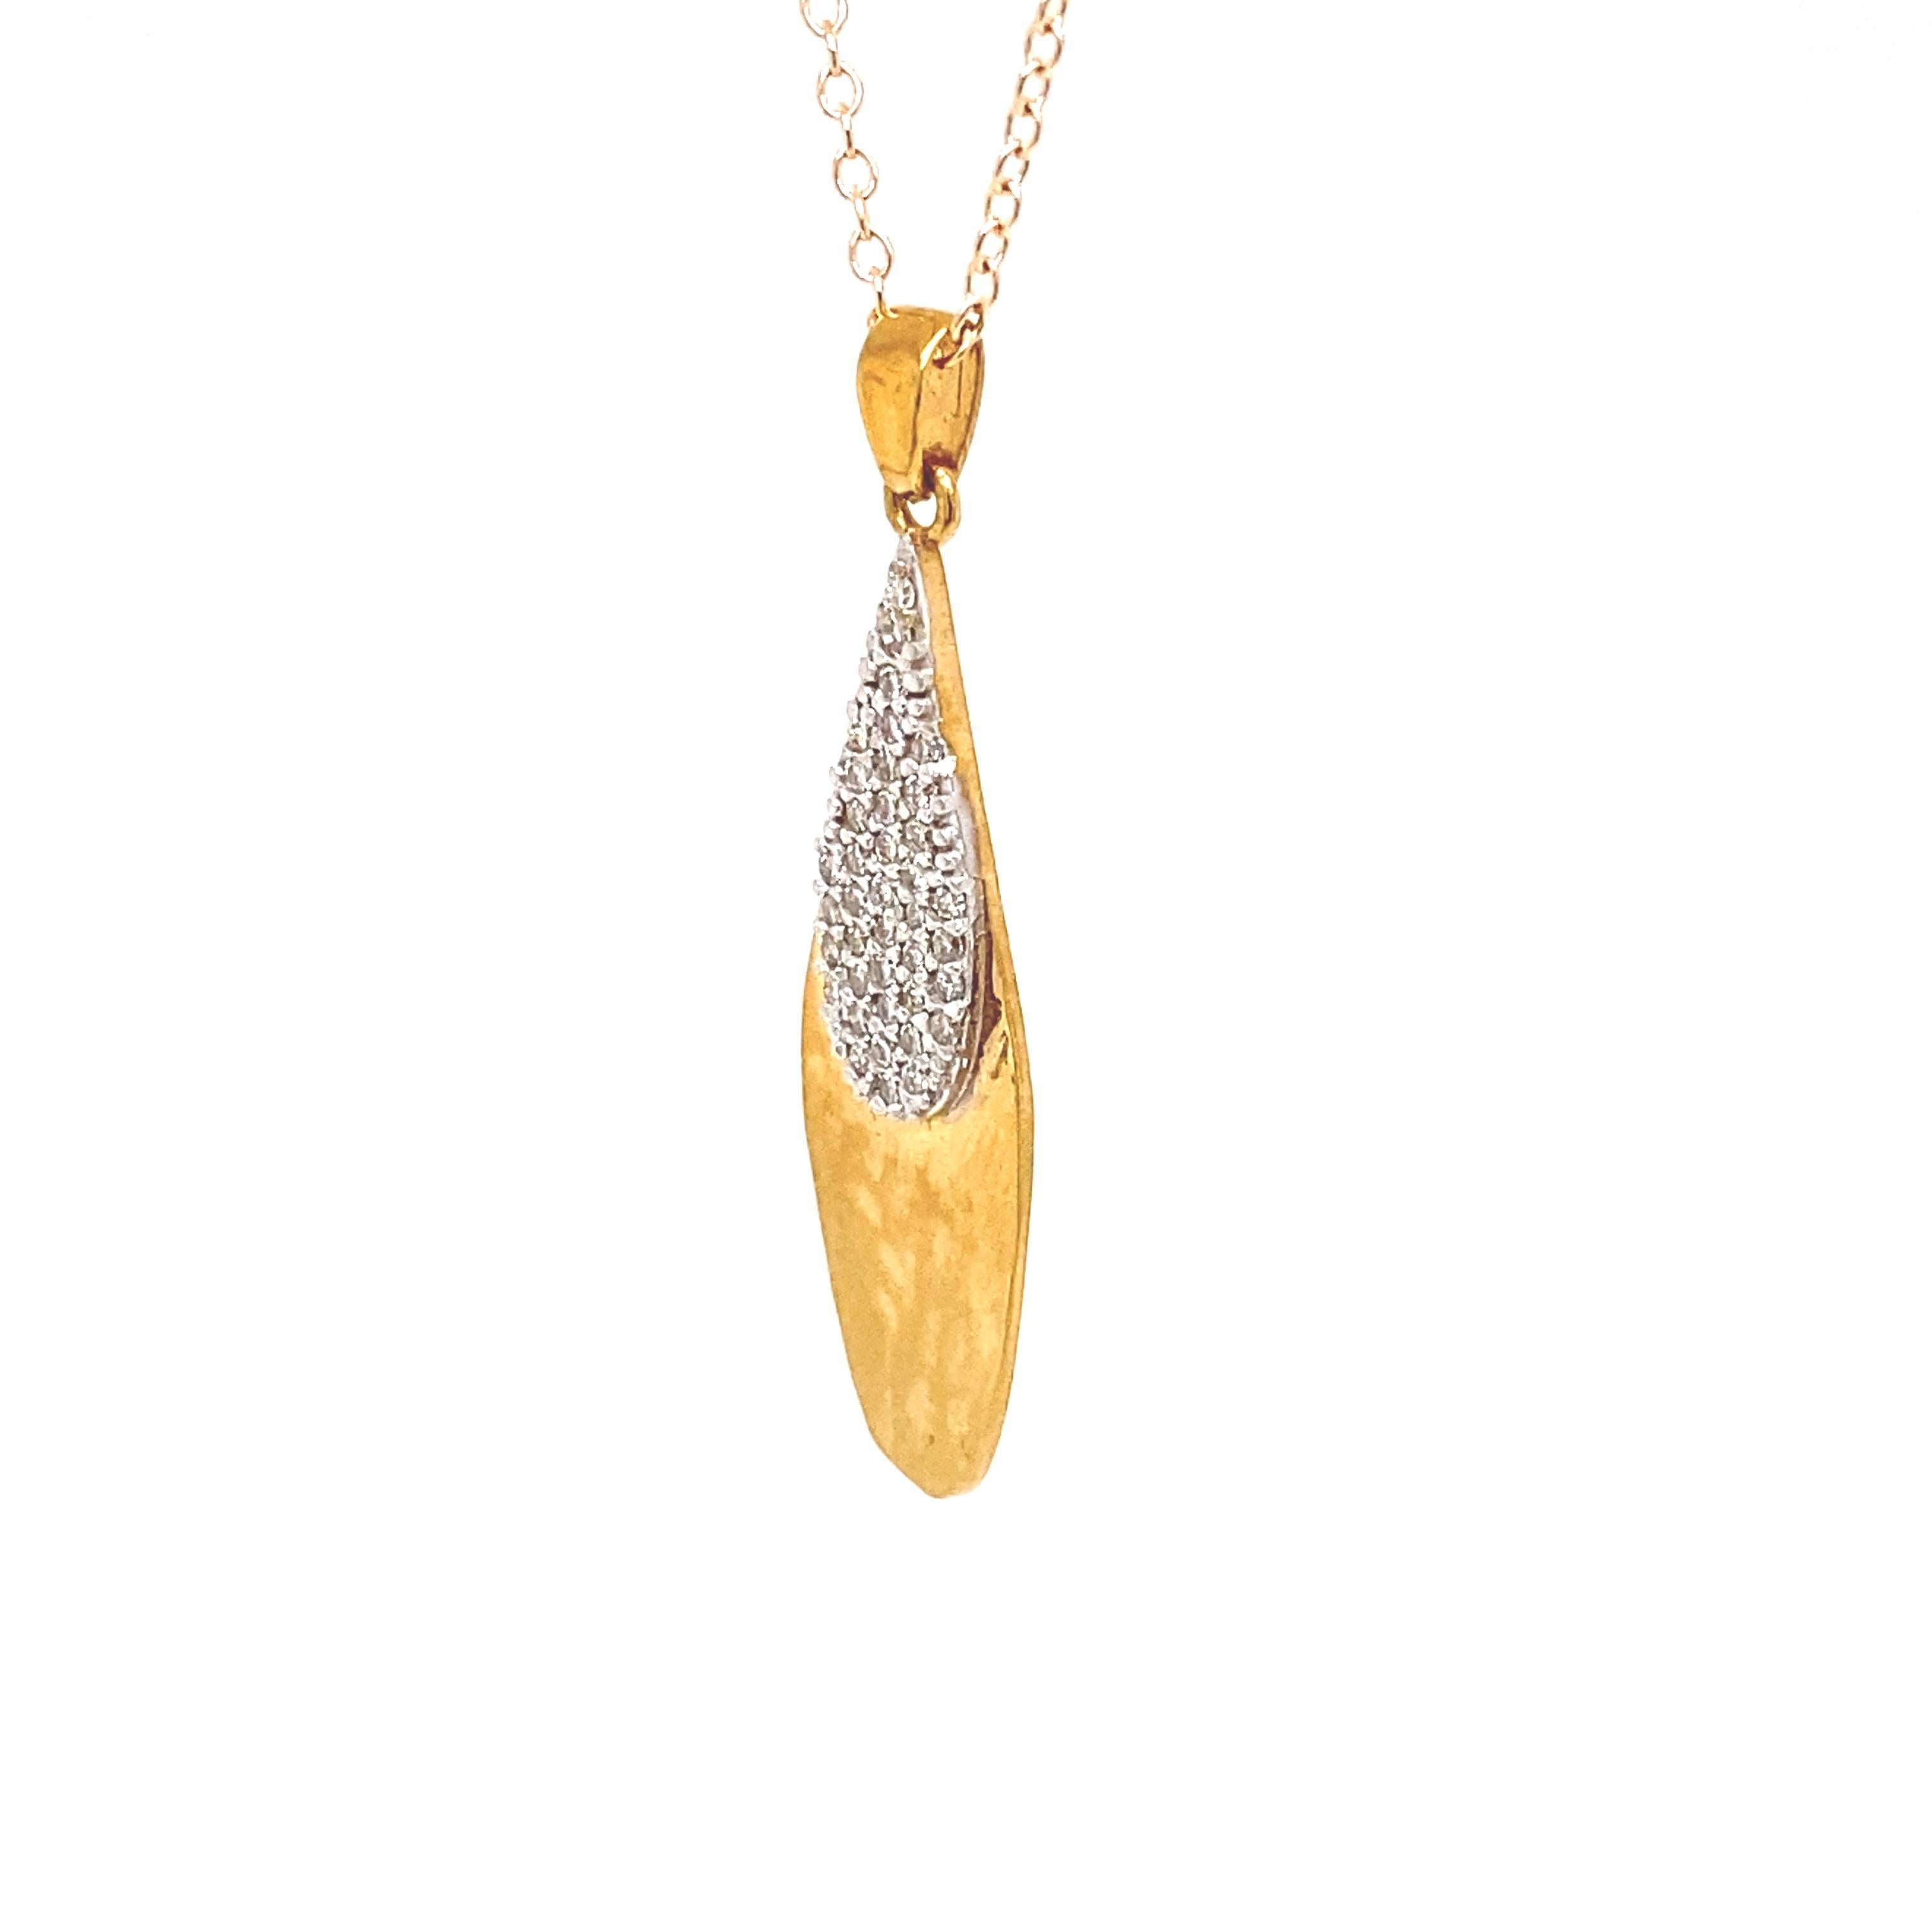 14 Karat Yellow Gold Hand-Crafted Matte and Hammer-Finished Tear-Drop Pendant, Accented with 0.24 Carats of Pave Set Diamonds, Sliding on a 16